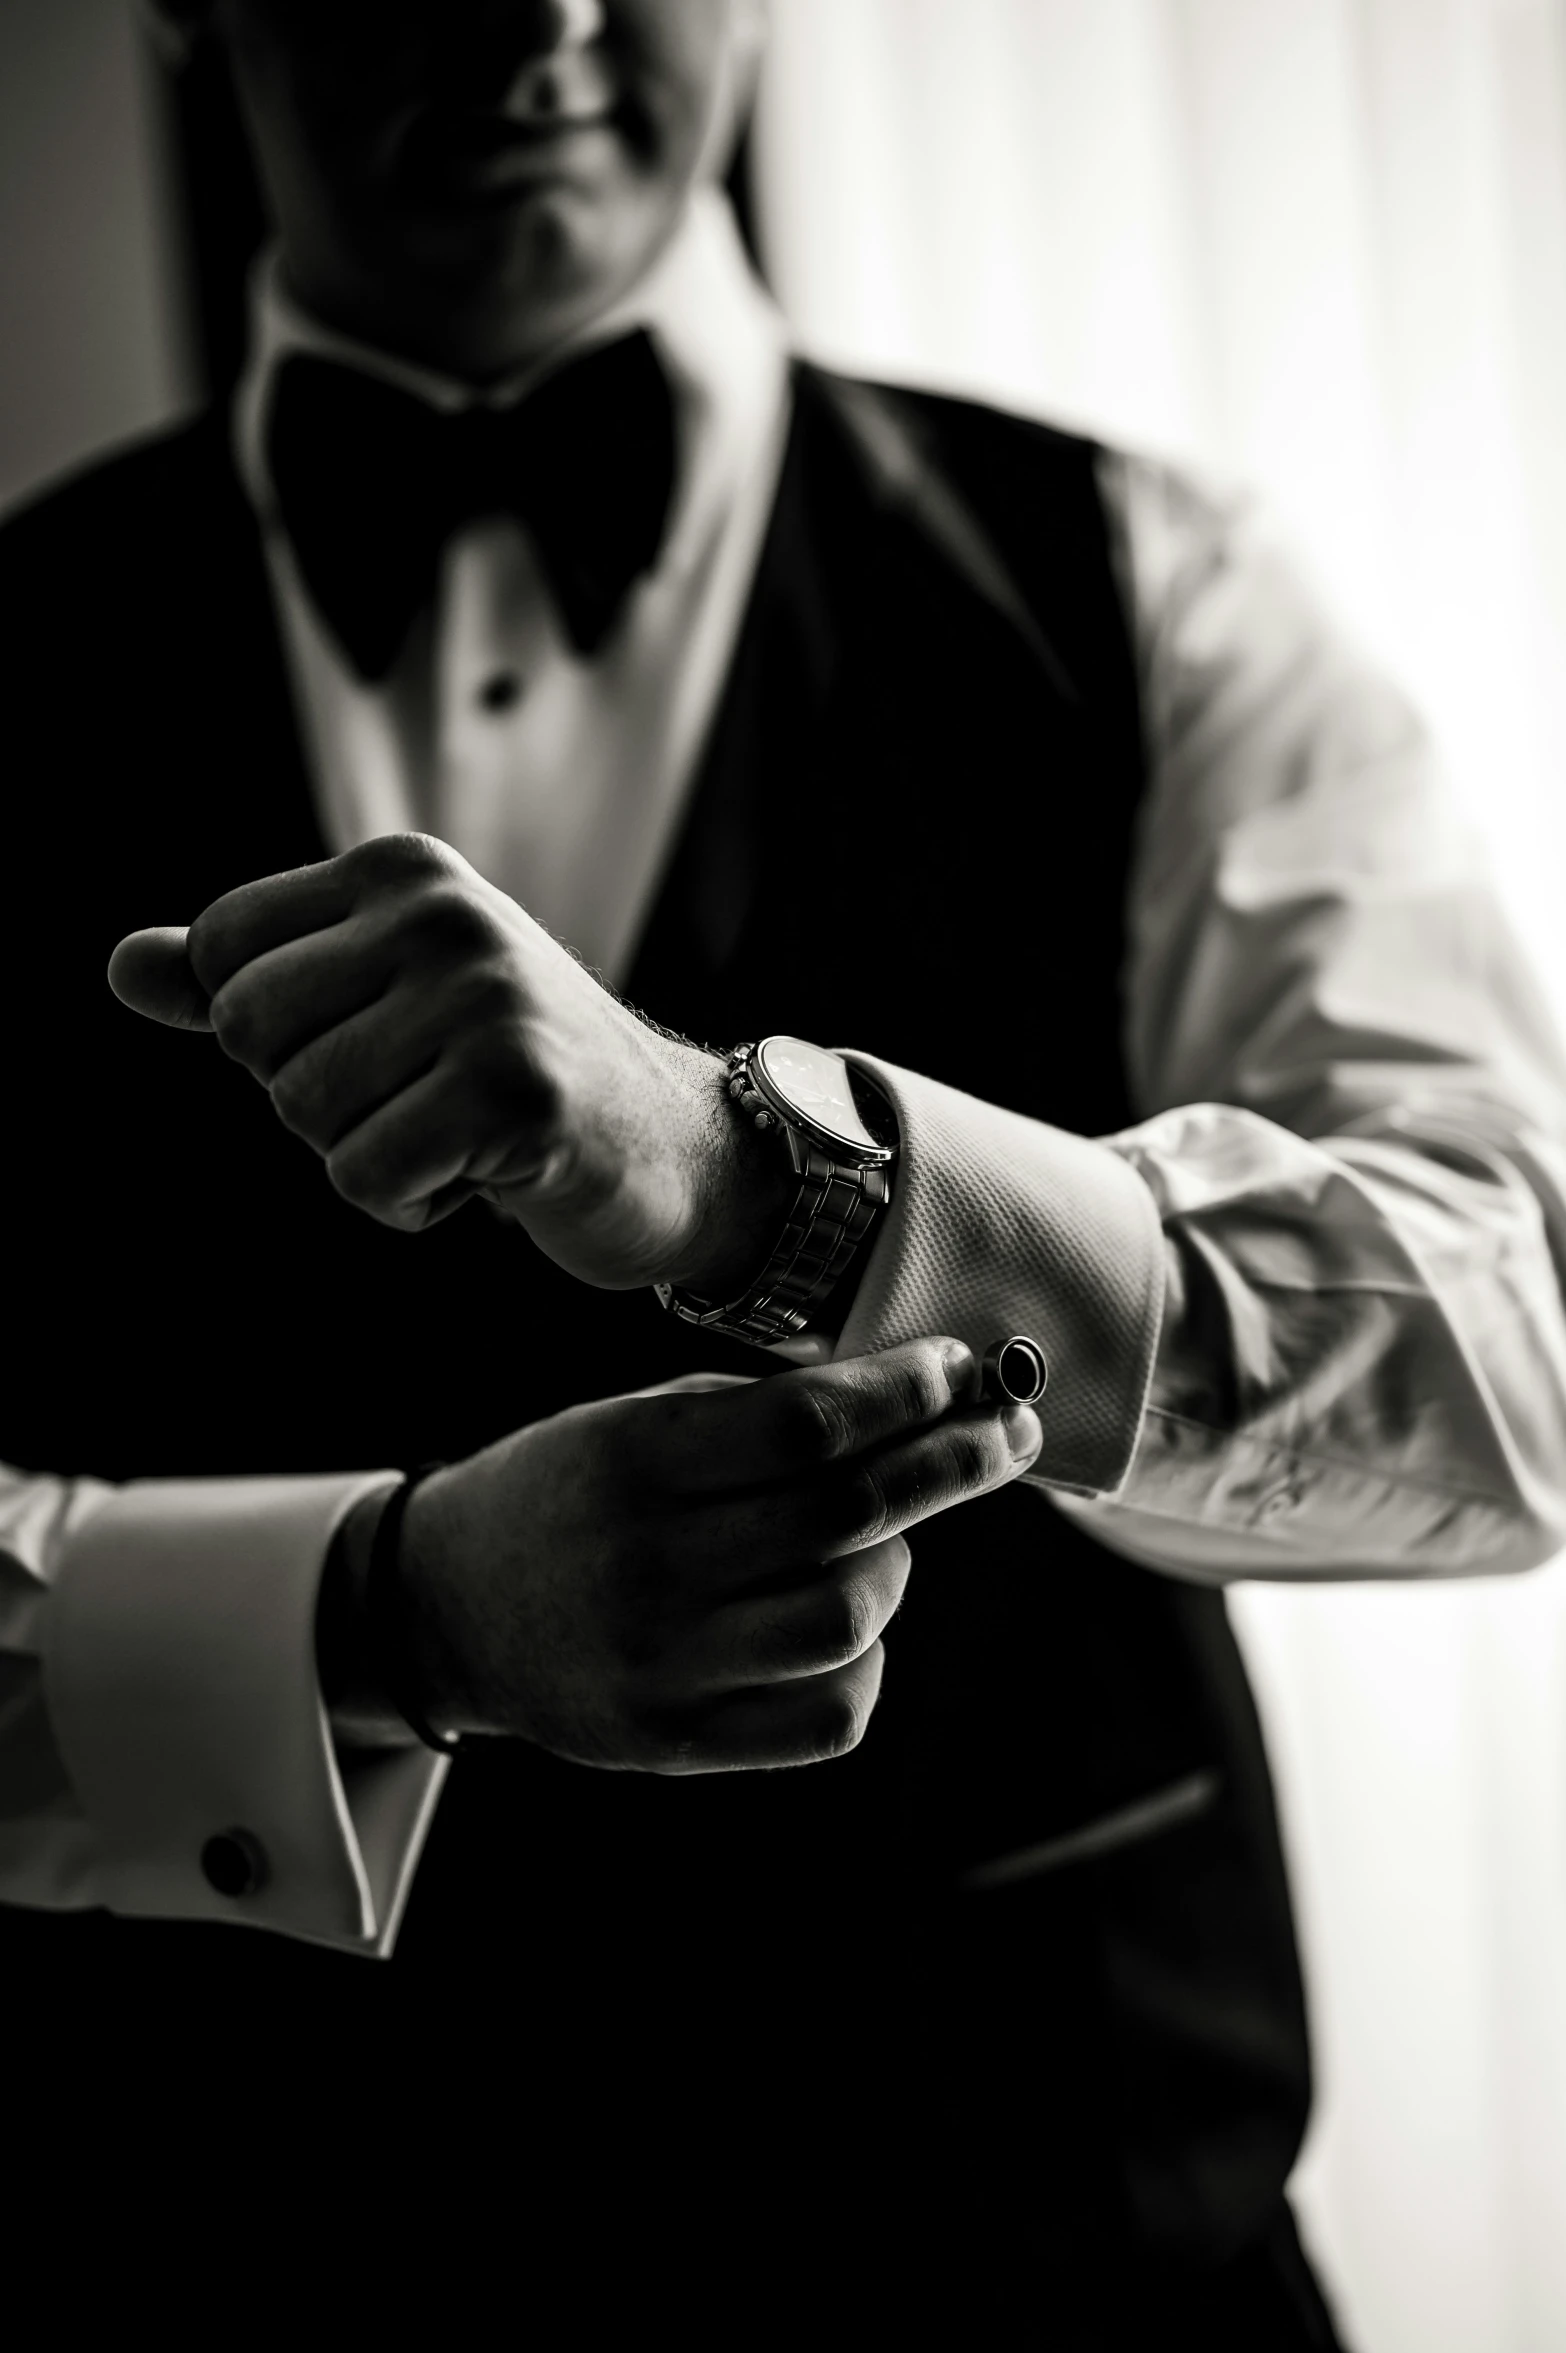 the man in the tuxedo is pointing to his watch